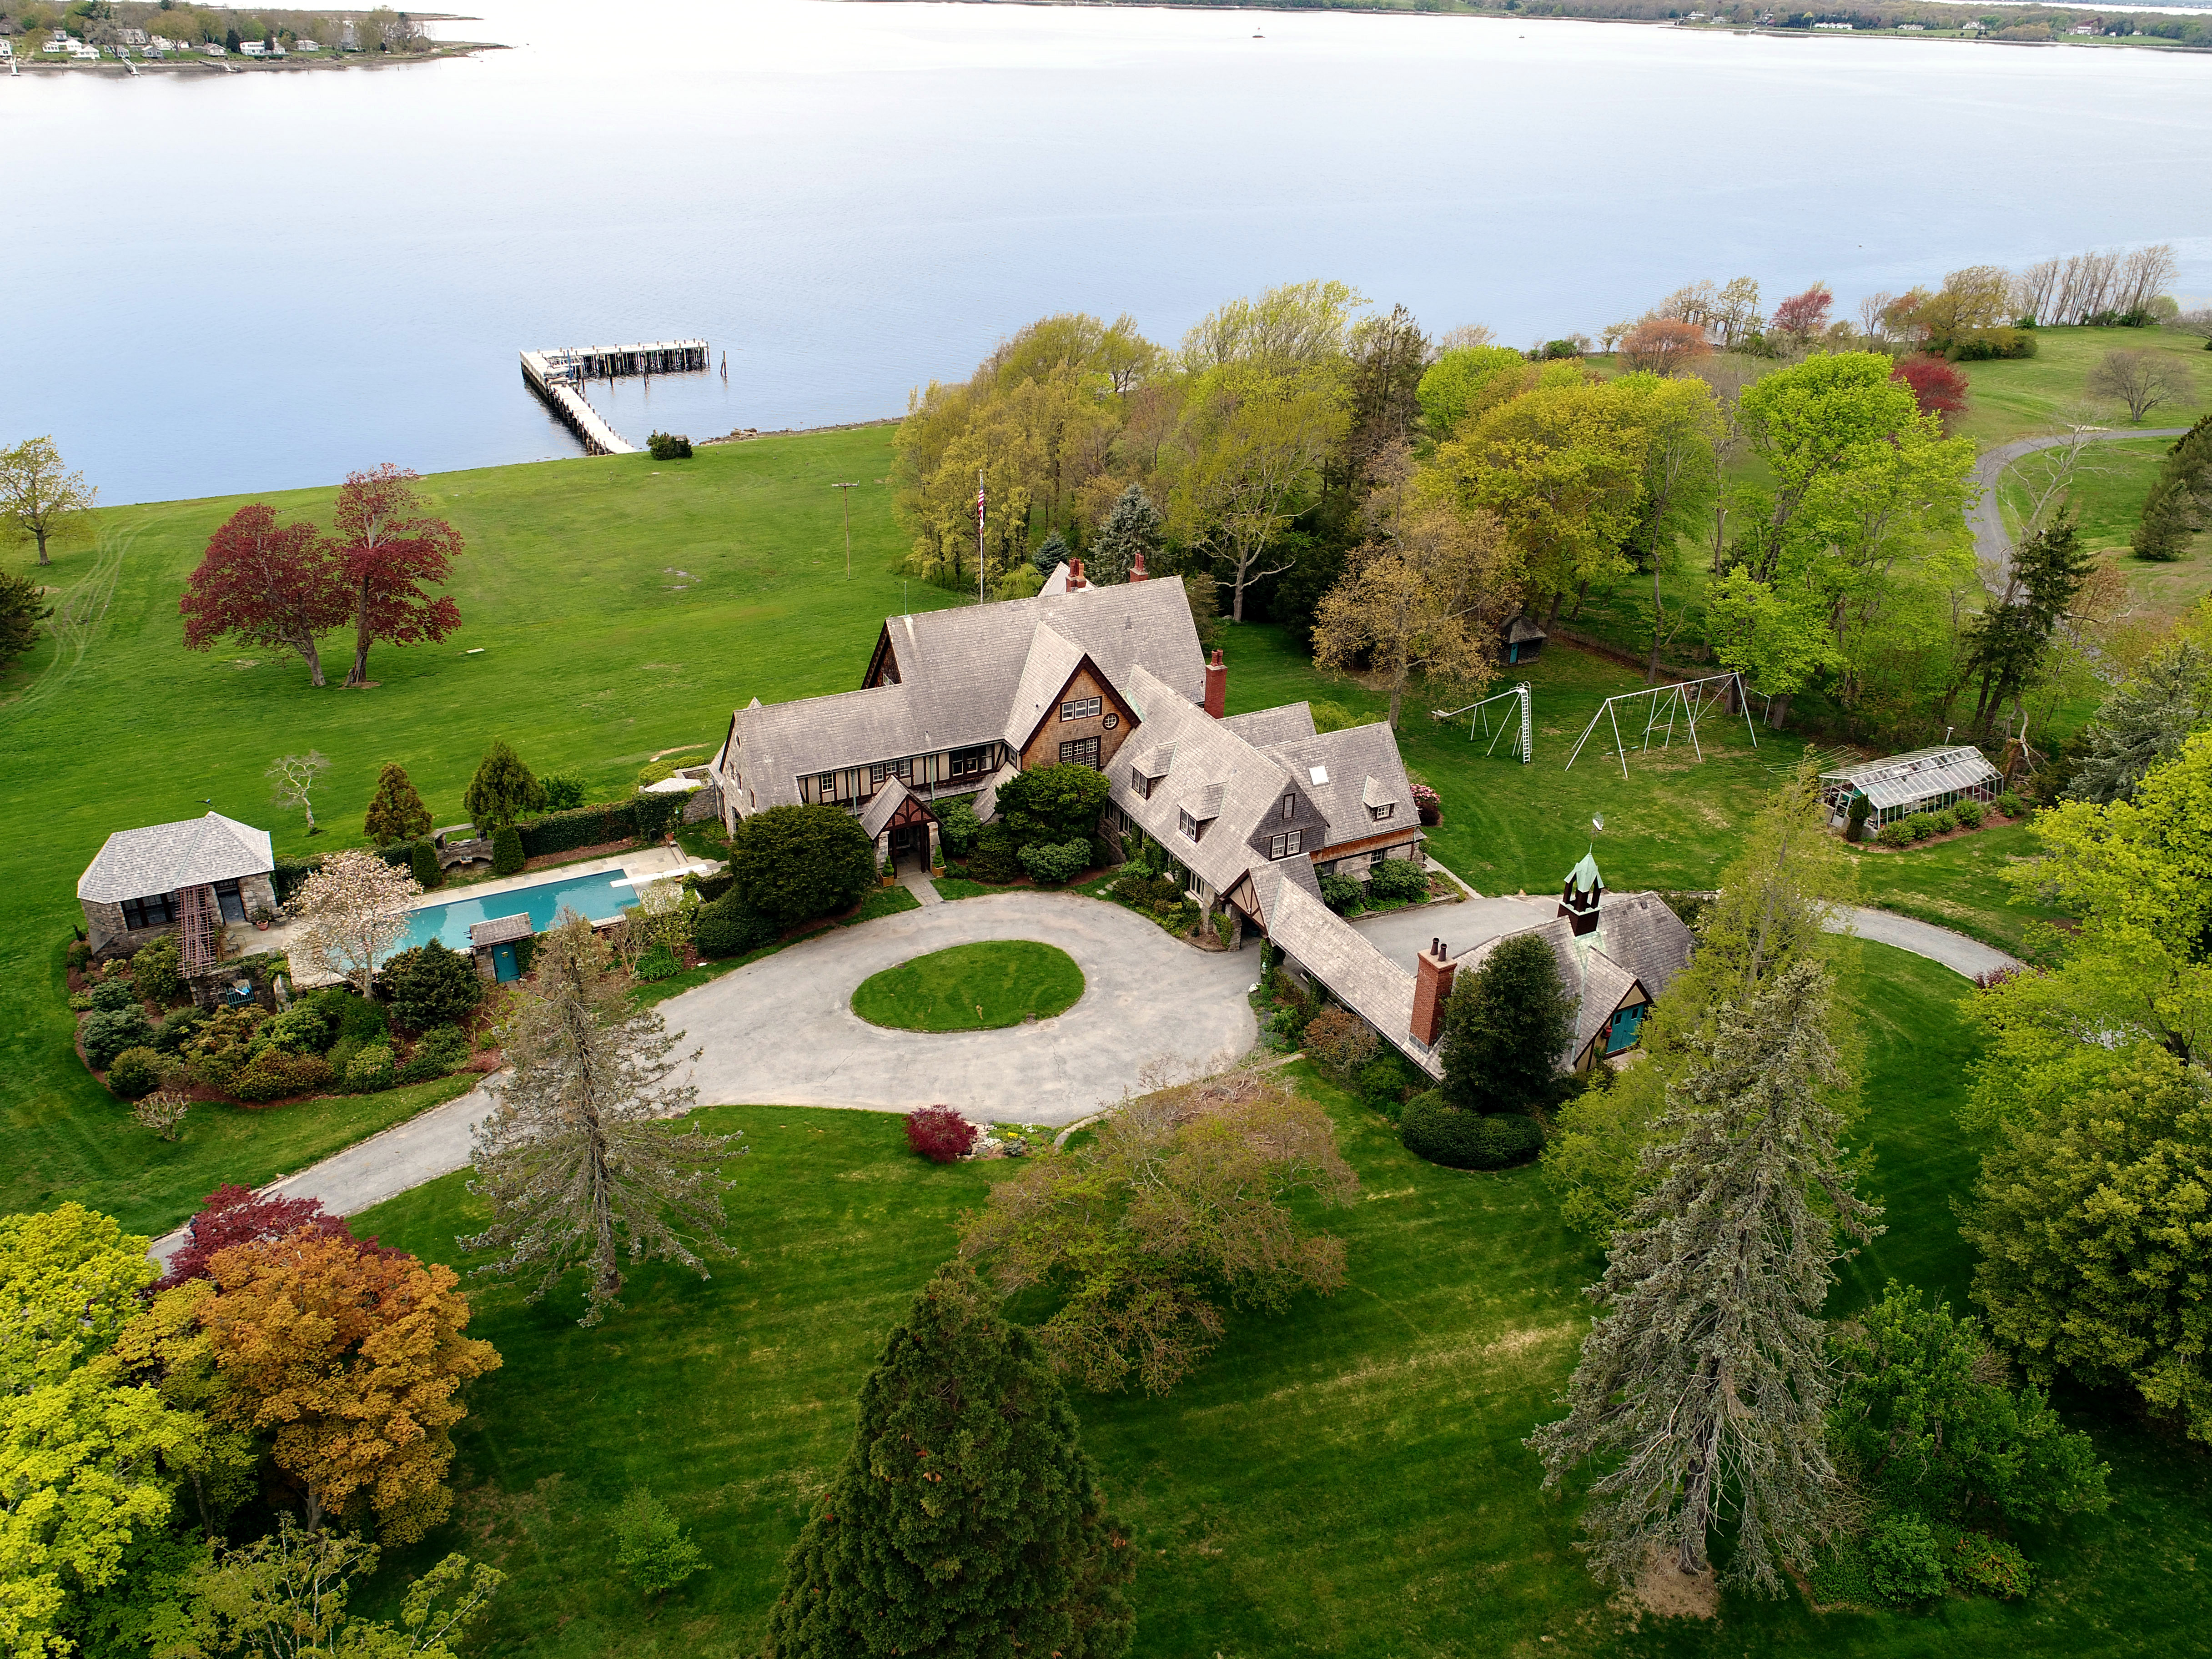 BRISTOL’S “WIND HILL” GOES ON THE MARKET FOR $6.995M